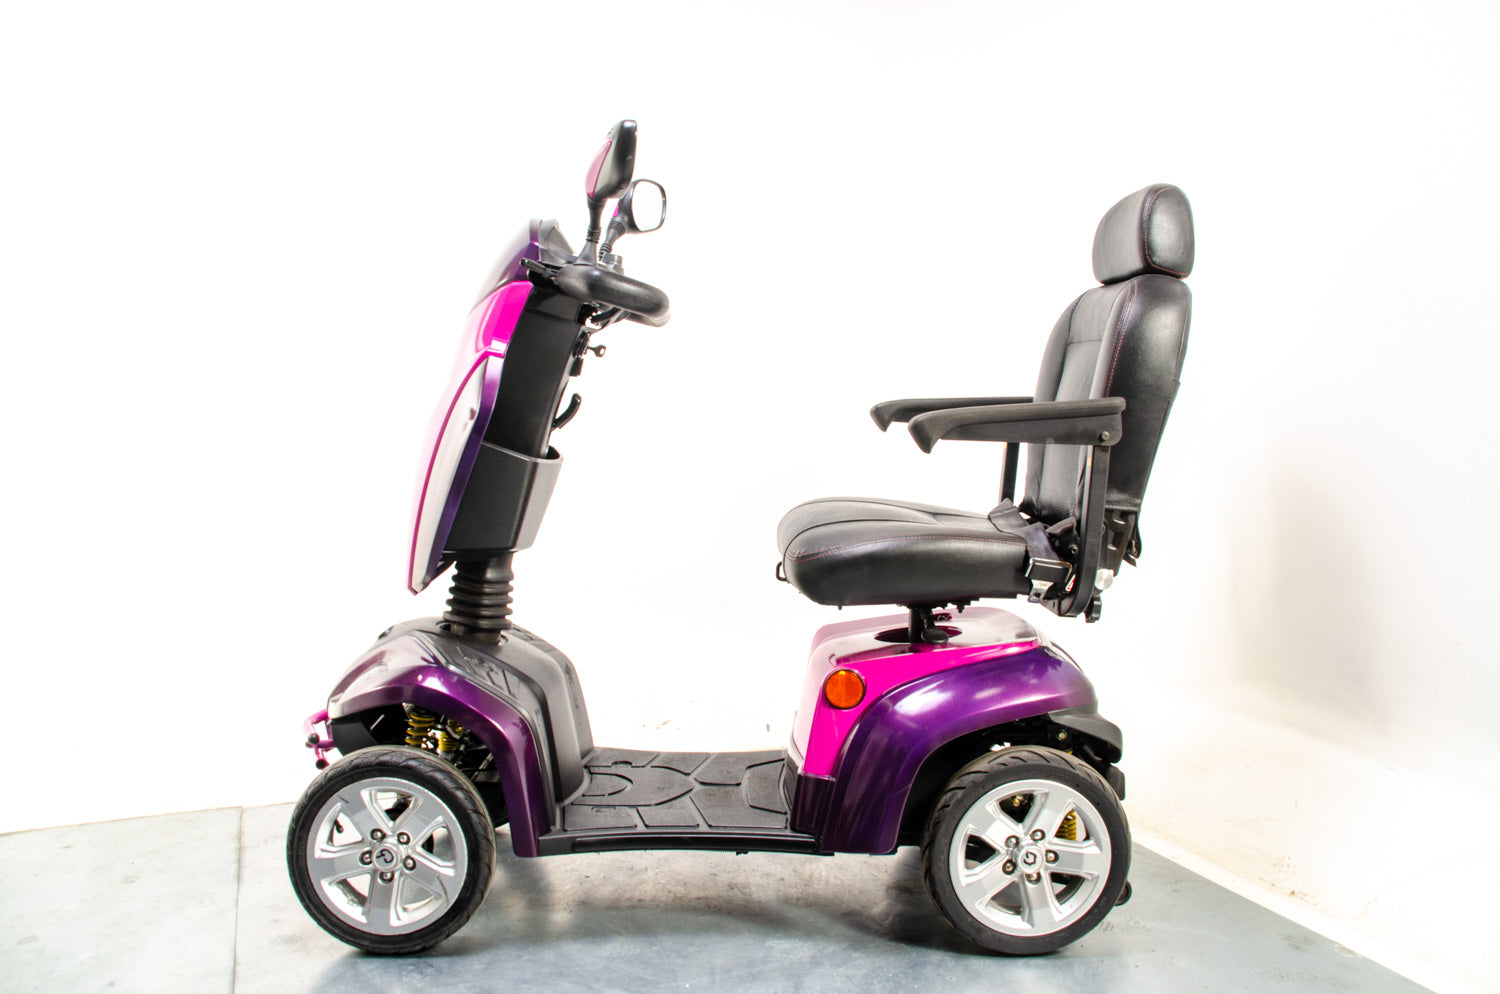 Kymco Agility Midsize Luxury Mobility Scooter 8mph Pink Purple